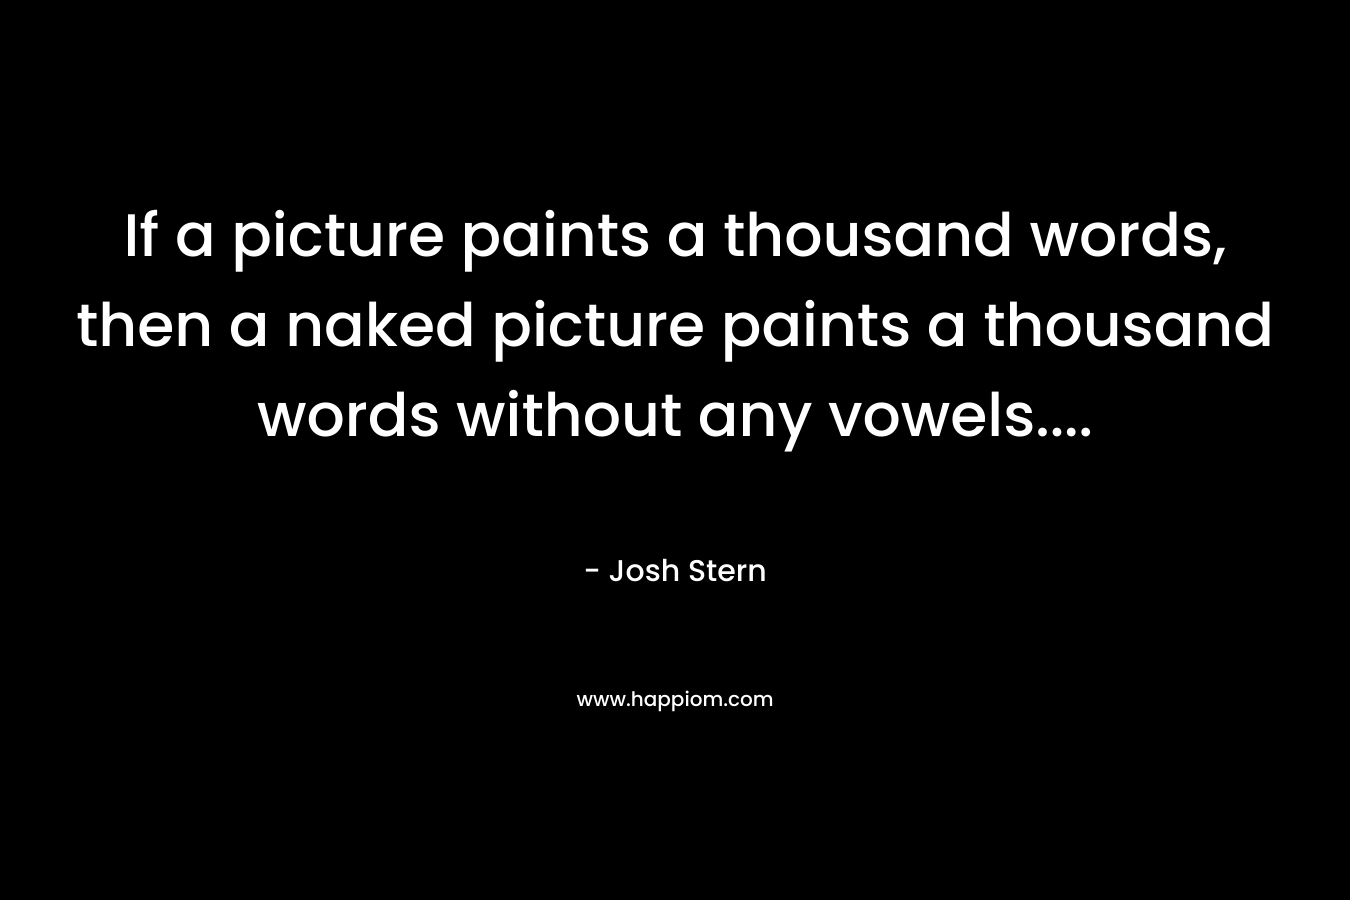 If a picture paints a thousand words, then a naked picture paints a thousand words without any vowels…. – Josh Stern